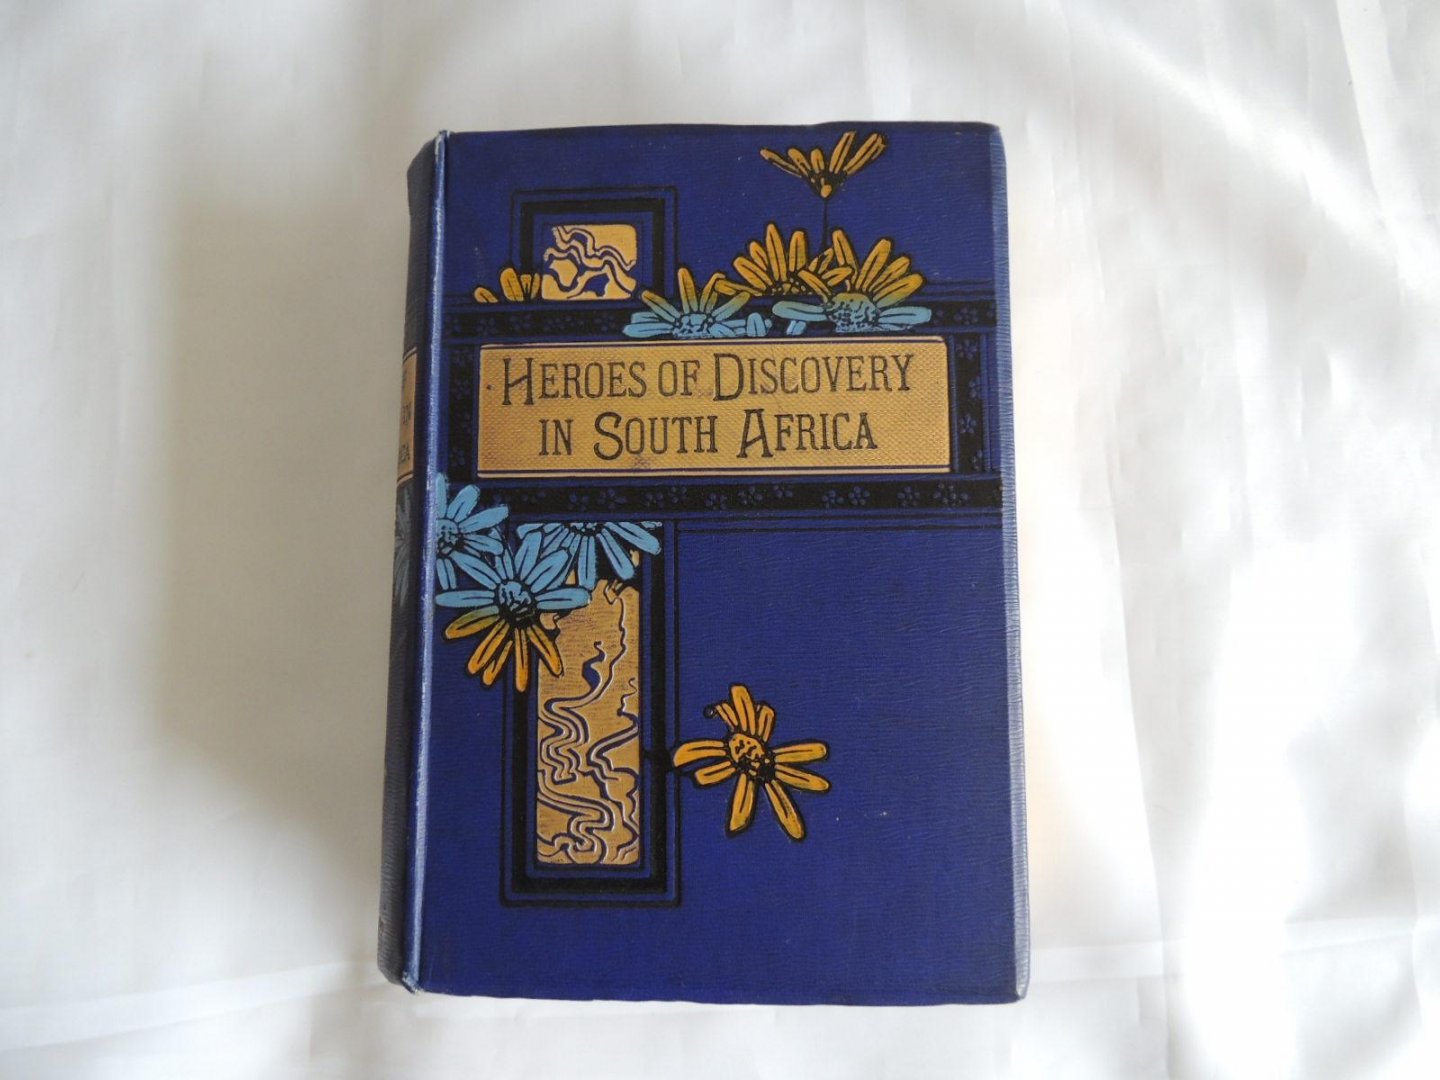 Bell (N) (N. D'Anvers) ---  Mungo Park - Heroes Of Discovery In South Africa --- Mungo Park - Travels in the interior of Africa - with eight illustrations in colour by John Williamson